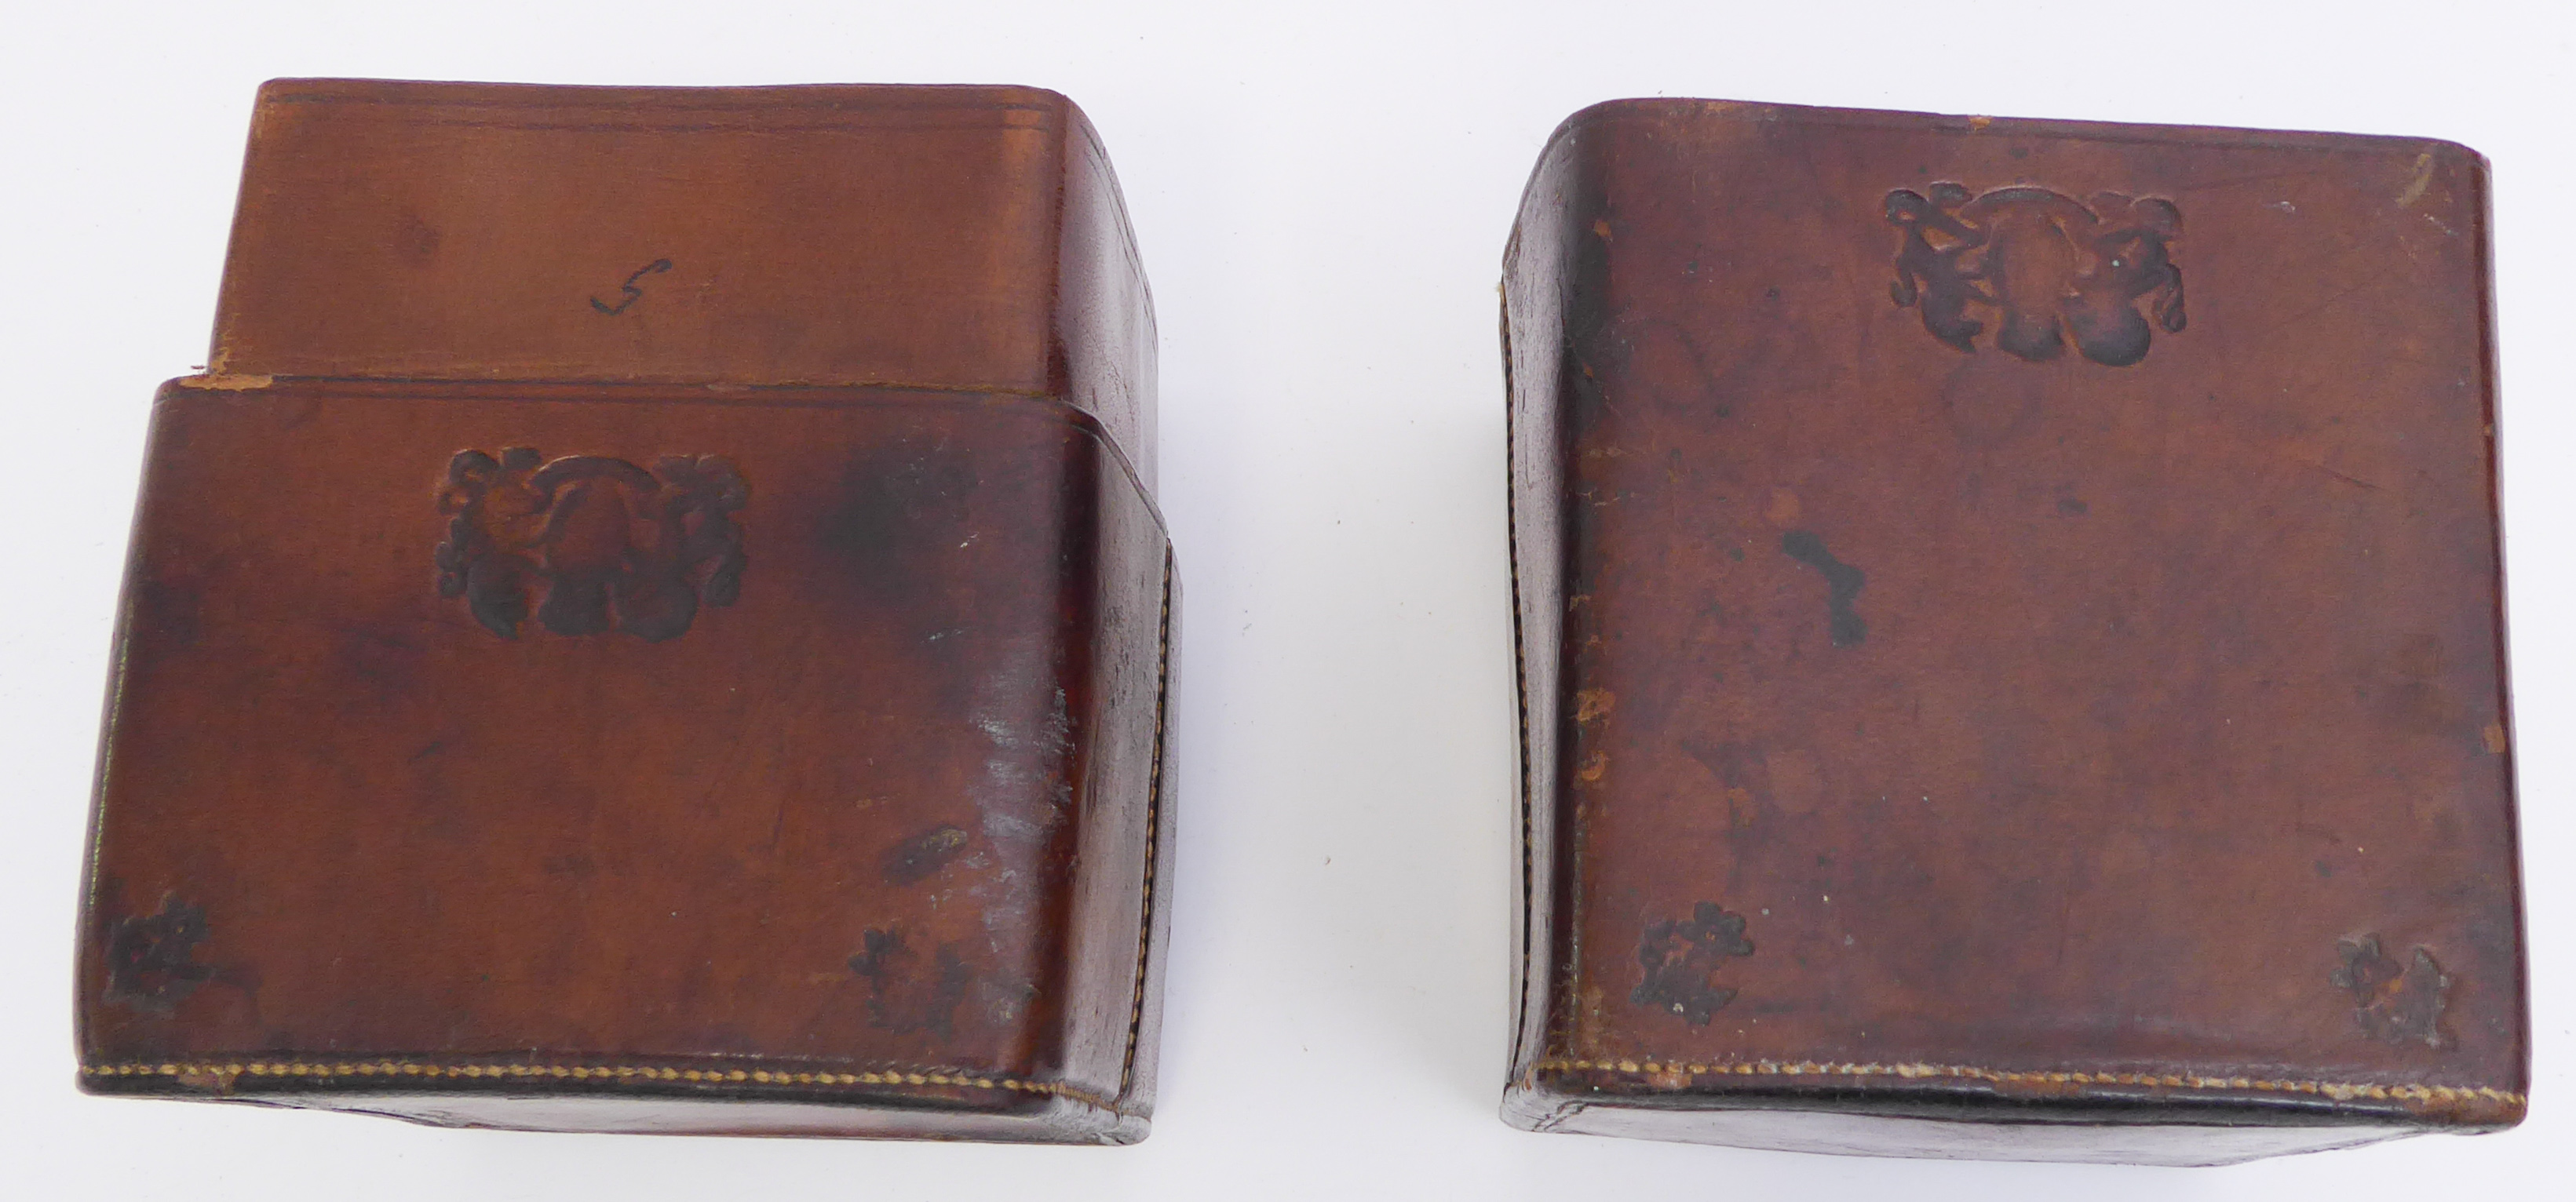 A leather-cased cut-glass and silver plate hunting flask and a leather-cased sandwich box and - Image 8 of 8